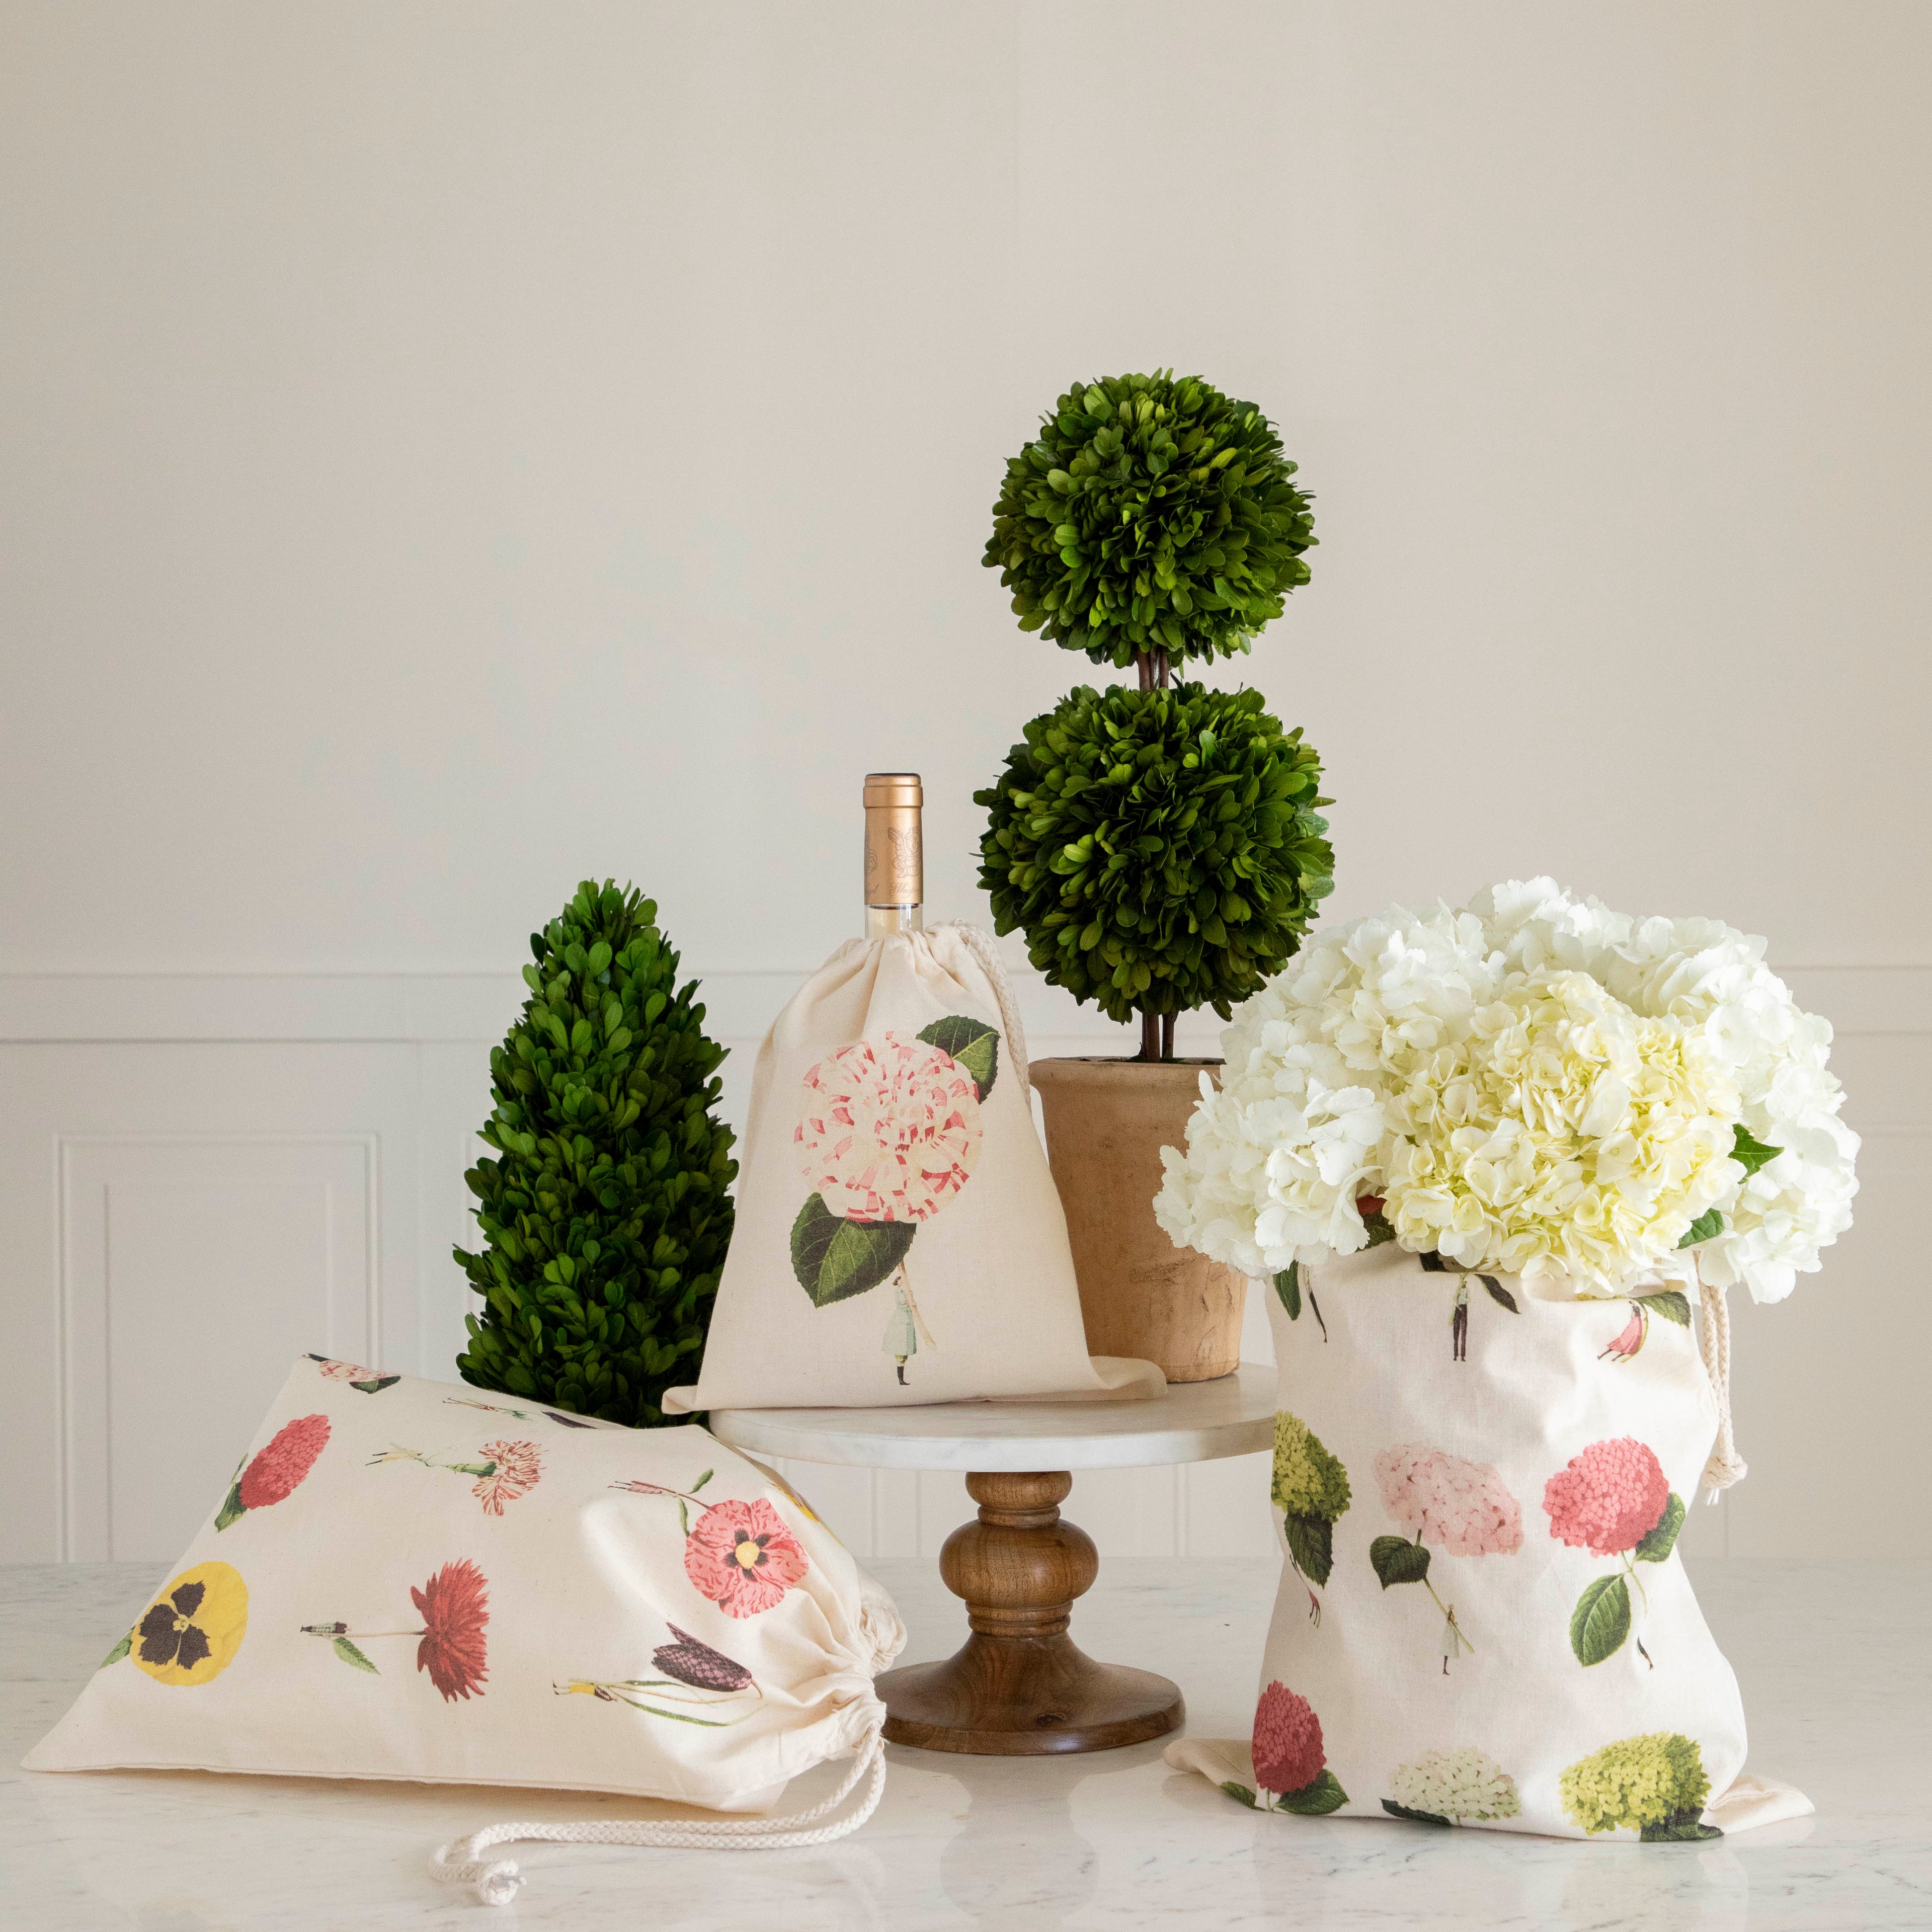 Decorative indoor setting with Laura Stoddart drawstring bags in floral patterns, topiary plants, and a vase of white hydrangeas on a table from Hester &amp; Cook.